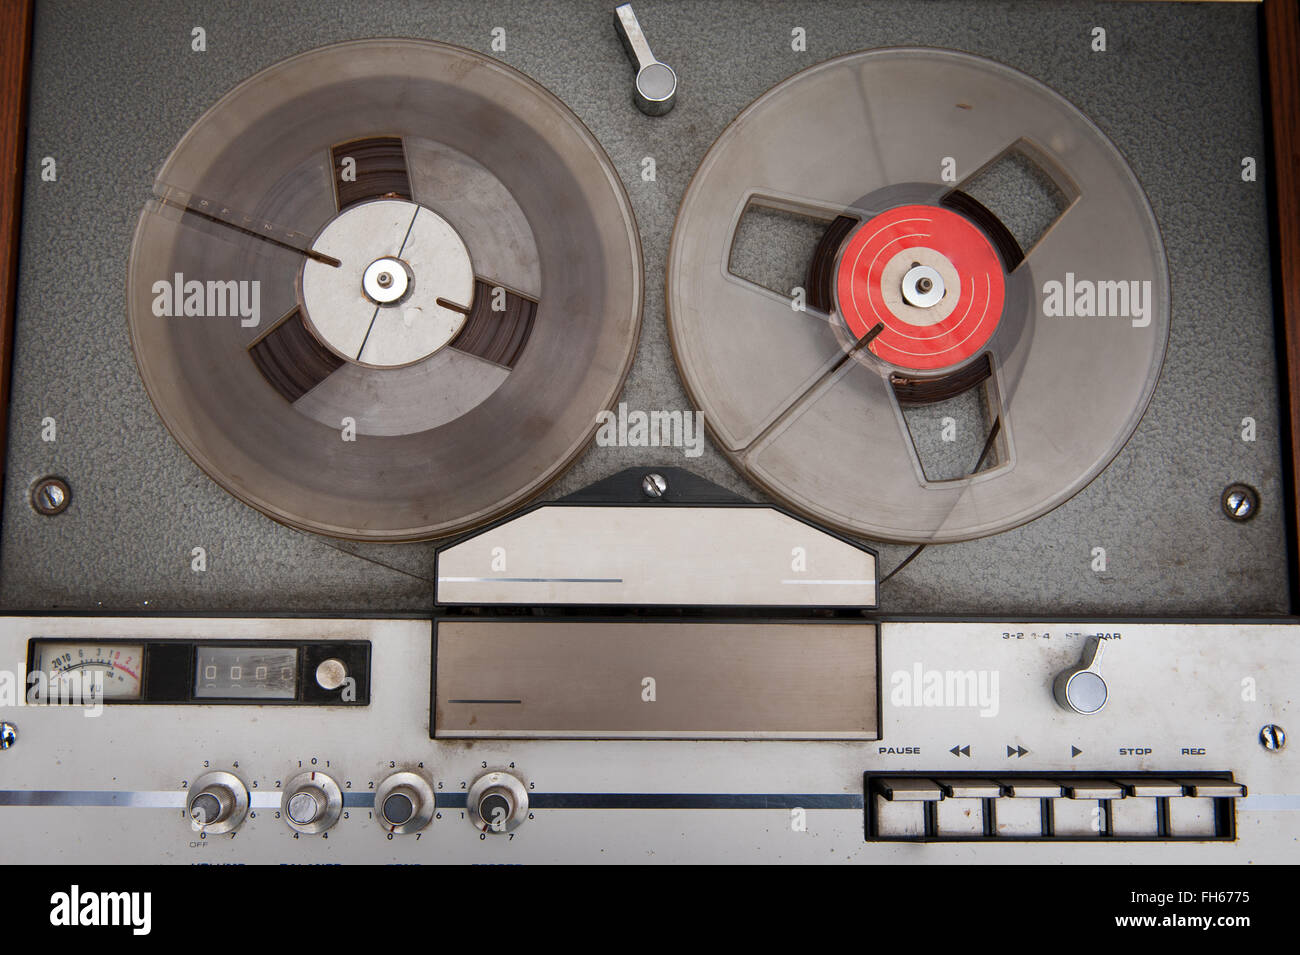 Vintage audio tape music recorder with reels and knobs Stock Photo